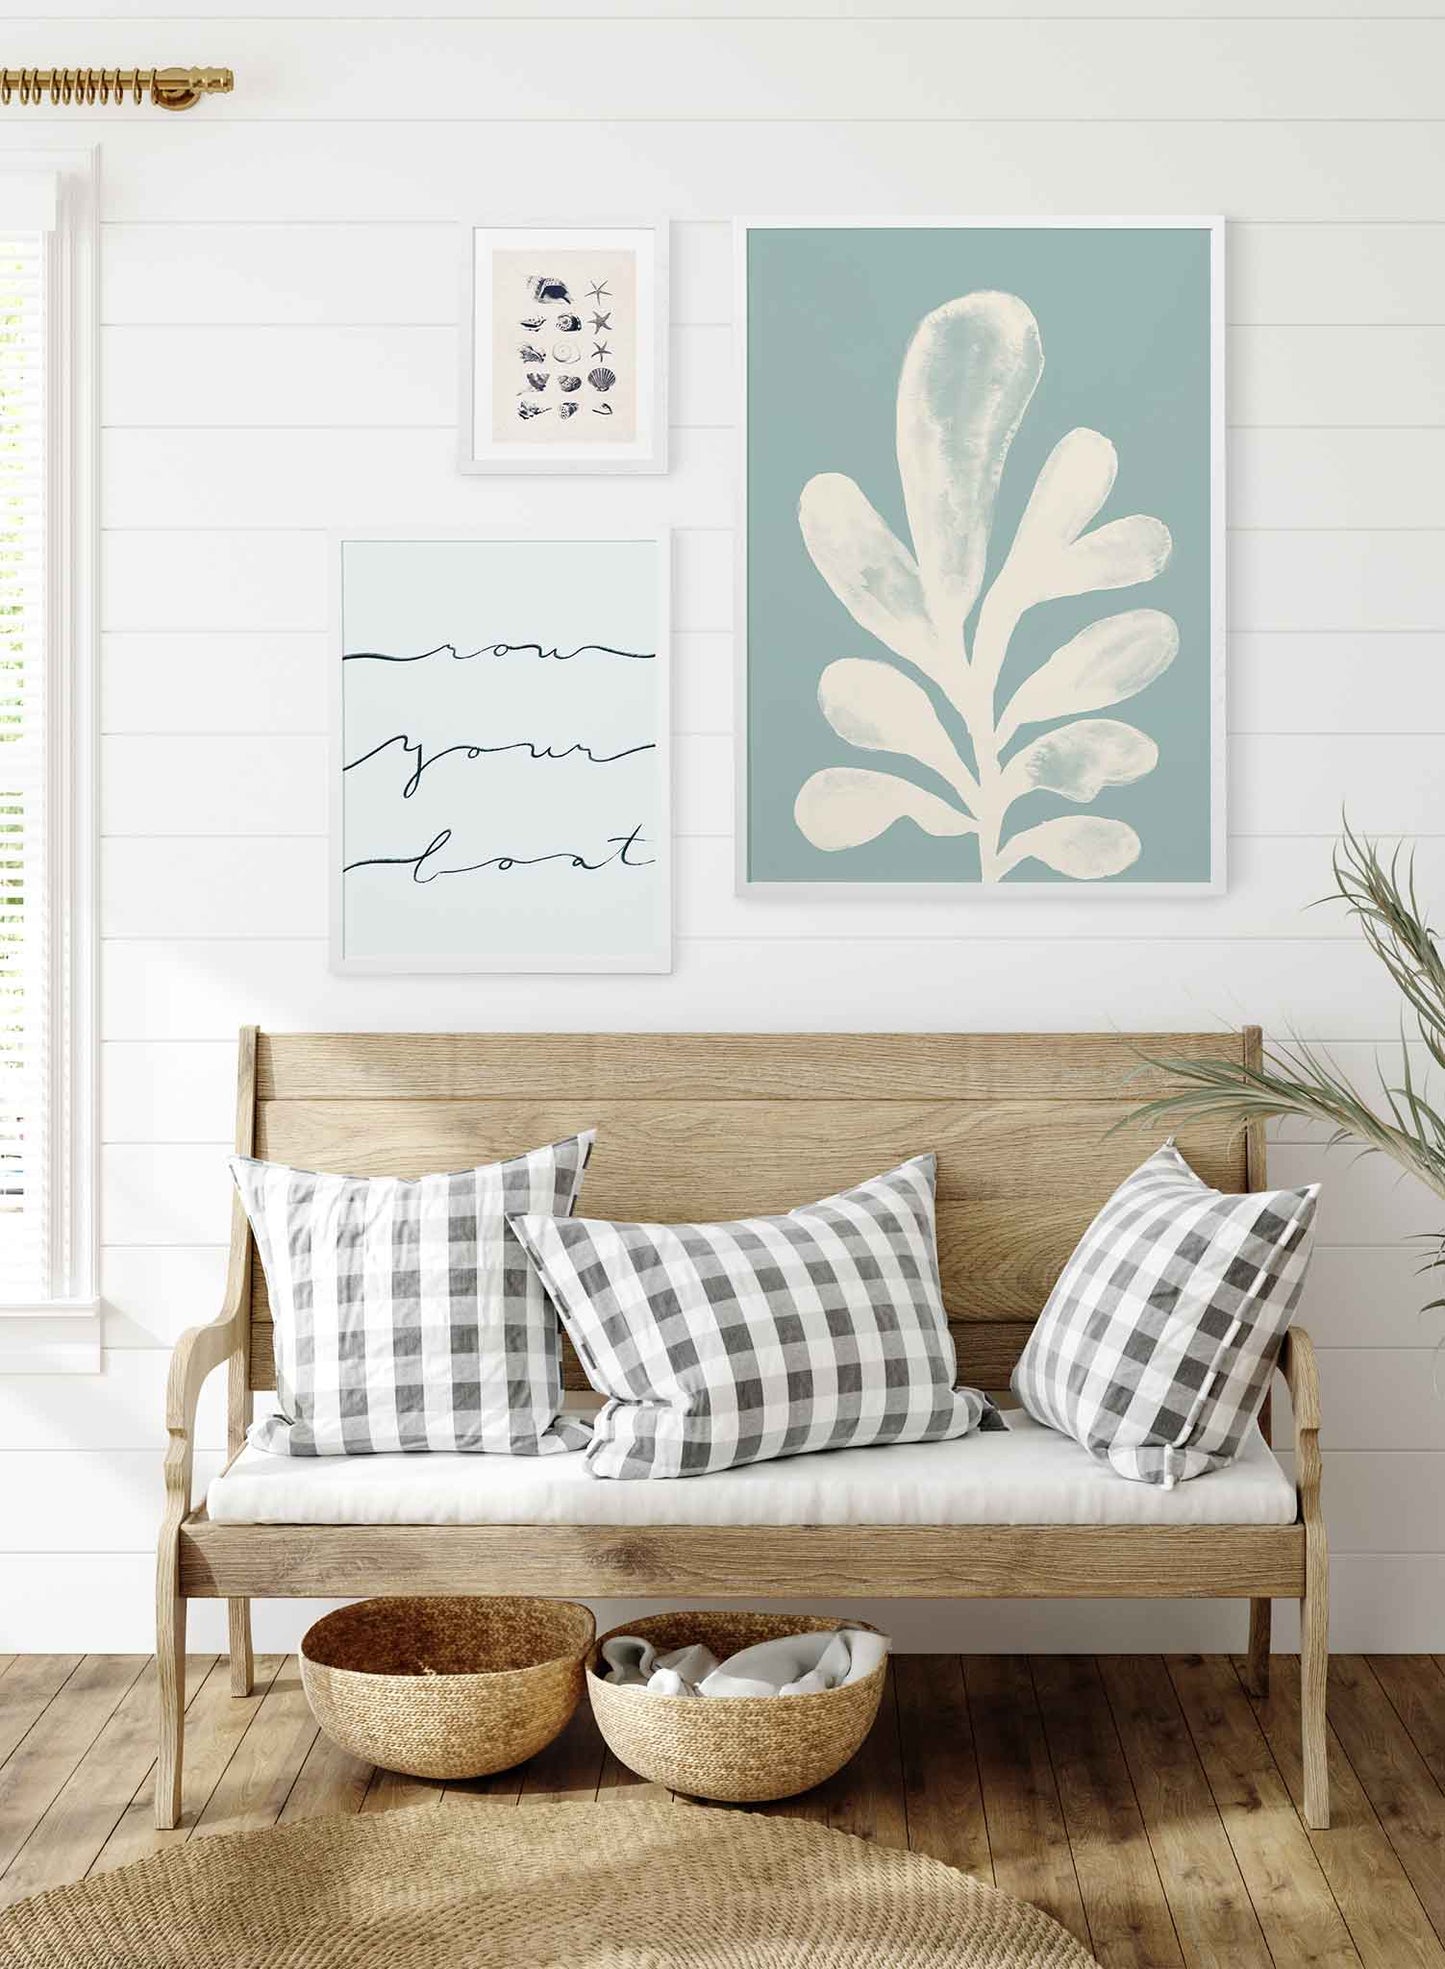 Sea Flower is a minimalist illustration of a single white seaweed leaf on a teal background by Opposite Wall.